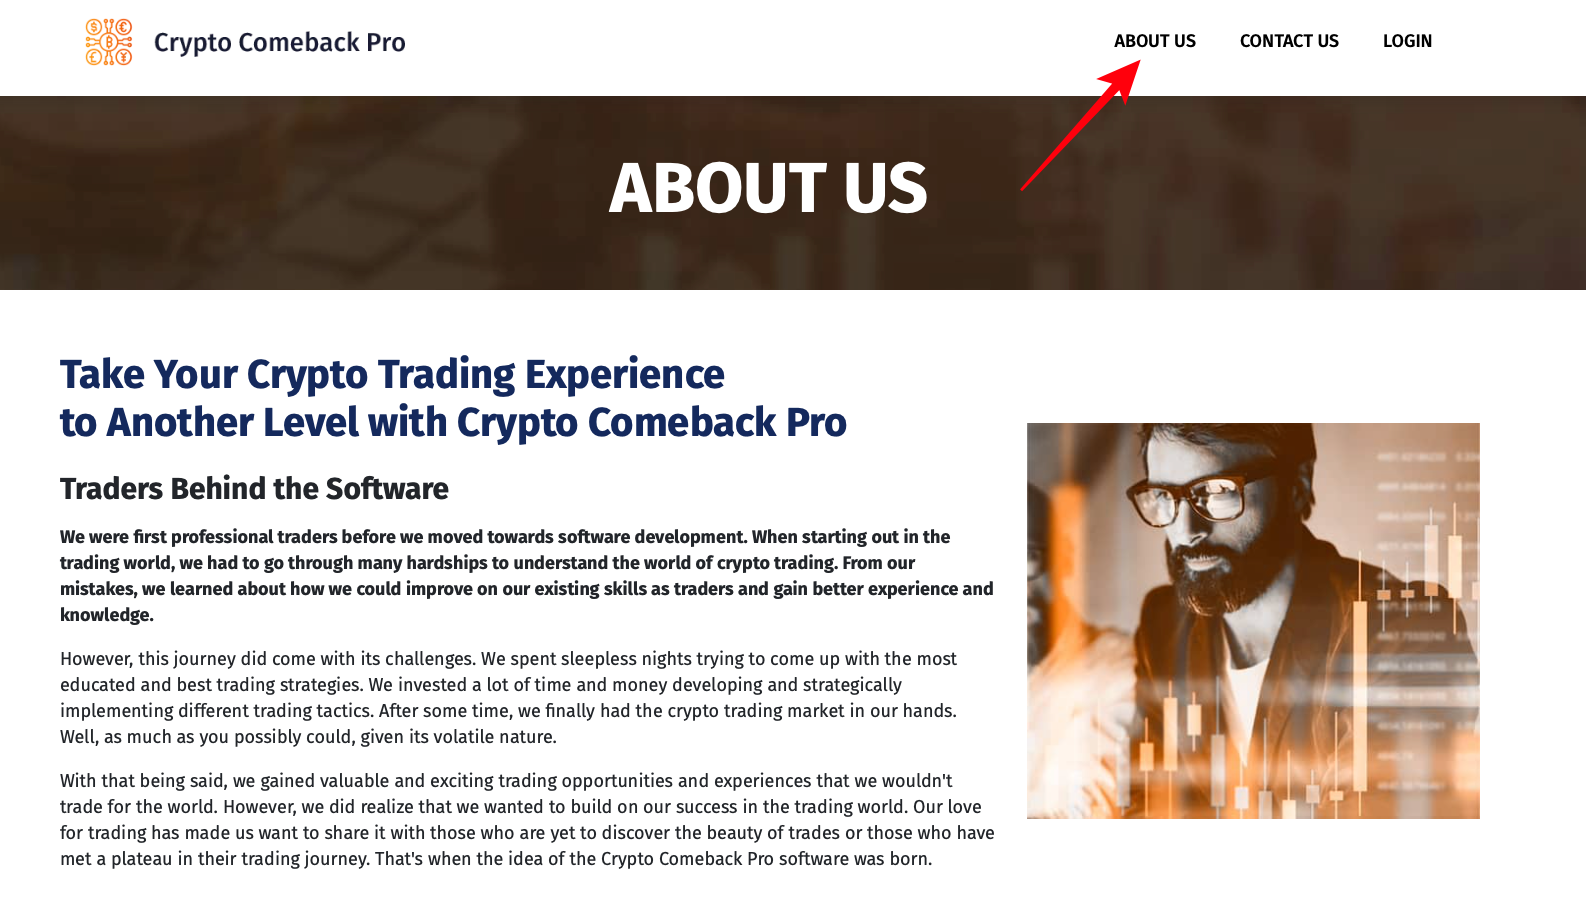 About the team of Crypto comeback pro